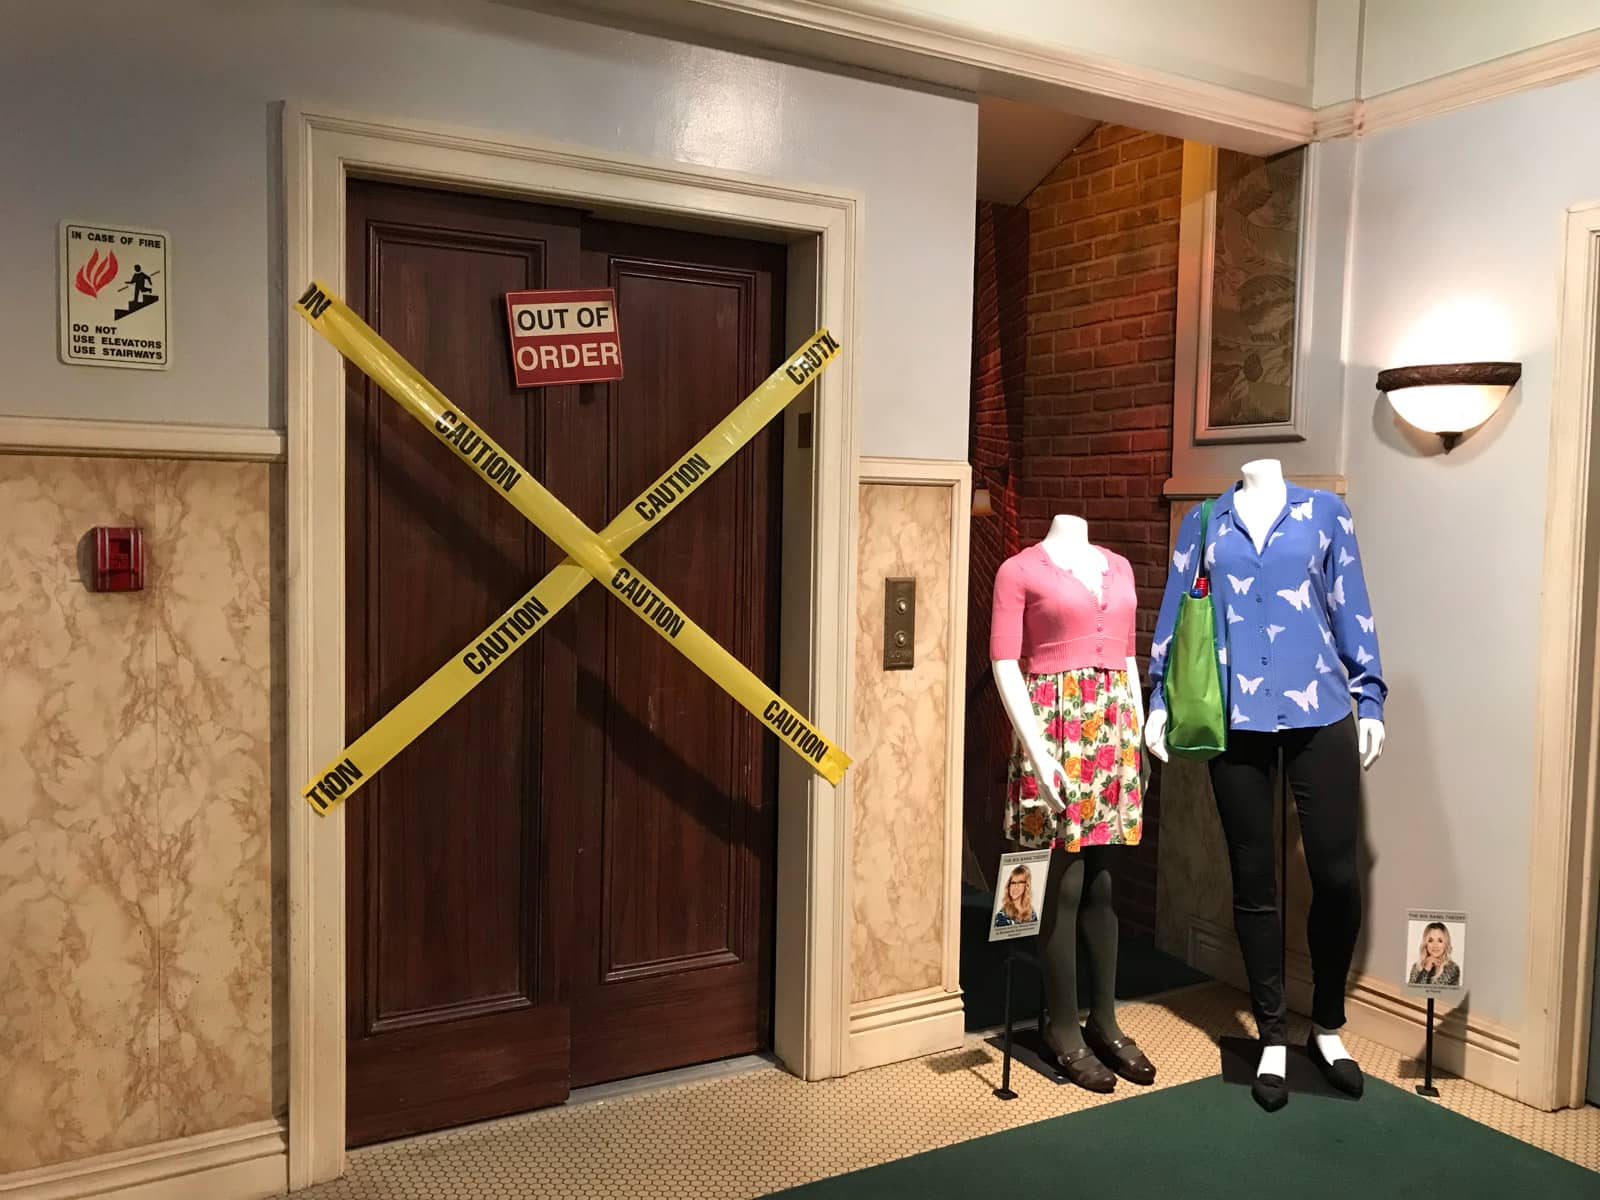 A television stage set that looks like the elevator in an apartment block, but that is not functioning. Yellow tape blocks the doors of the elevator. Two mannequins stand next to the elevator door, displaying characters’ costumes.